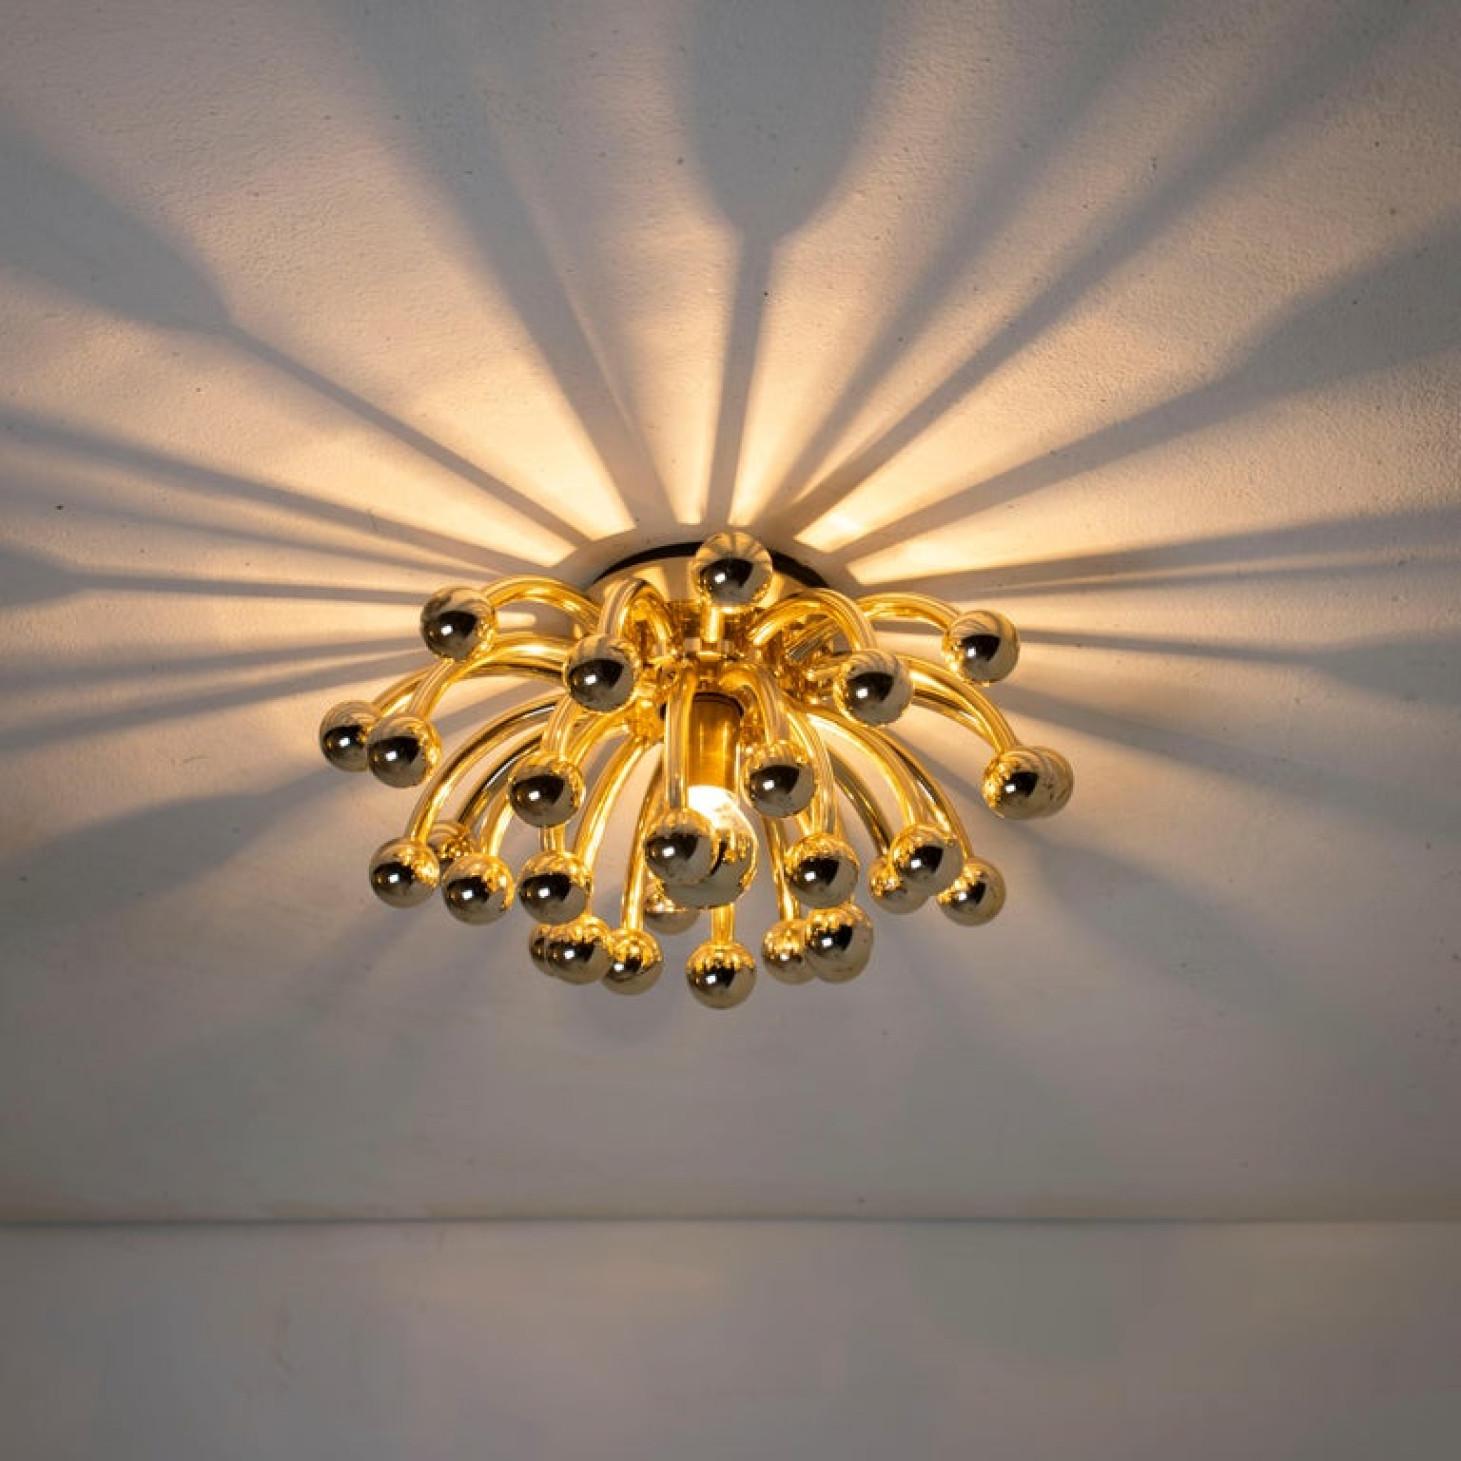 1 of the 4 Valenti Luce Pistillino Wall Lights, Italy, 1970 For Sale 2